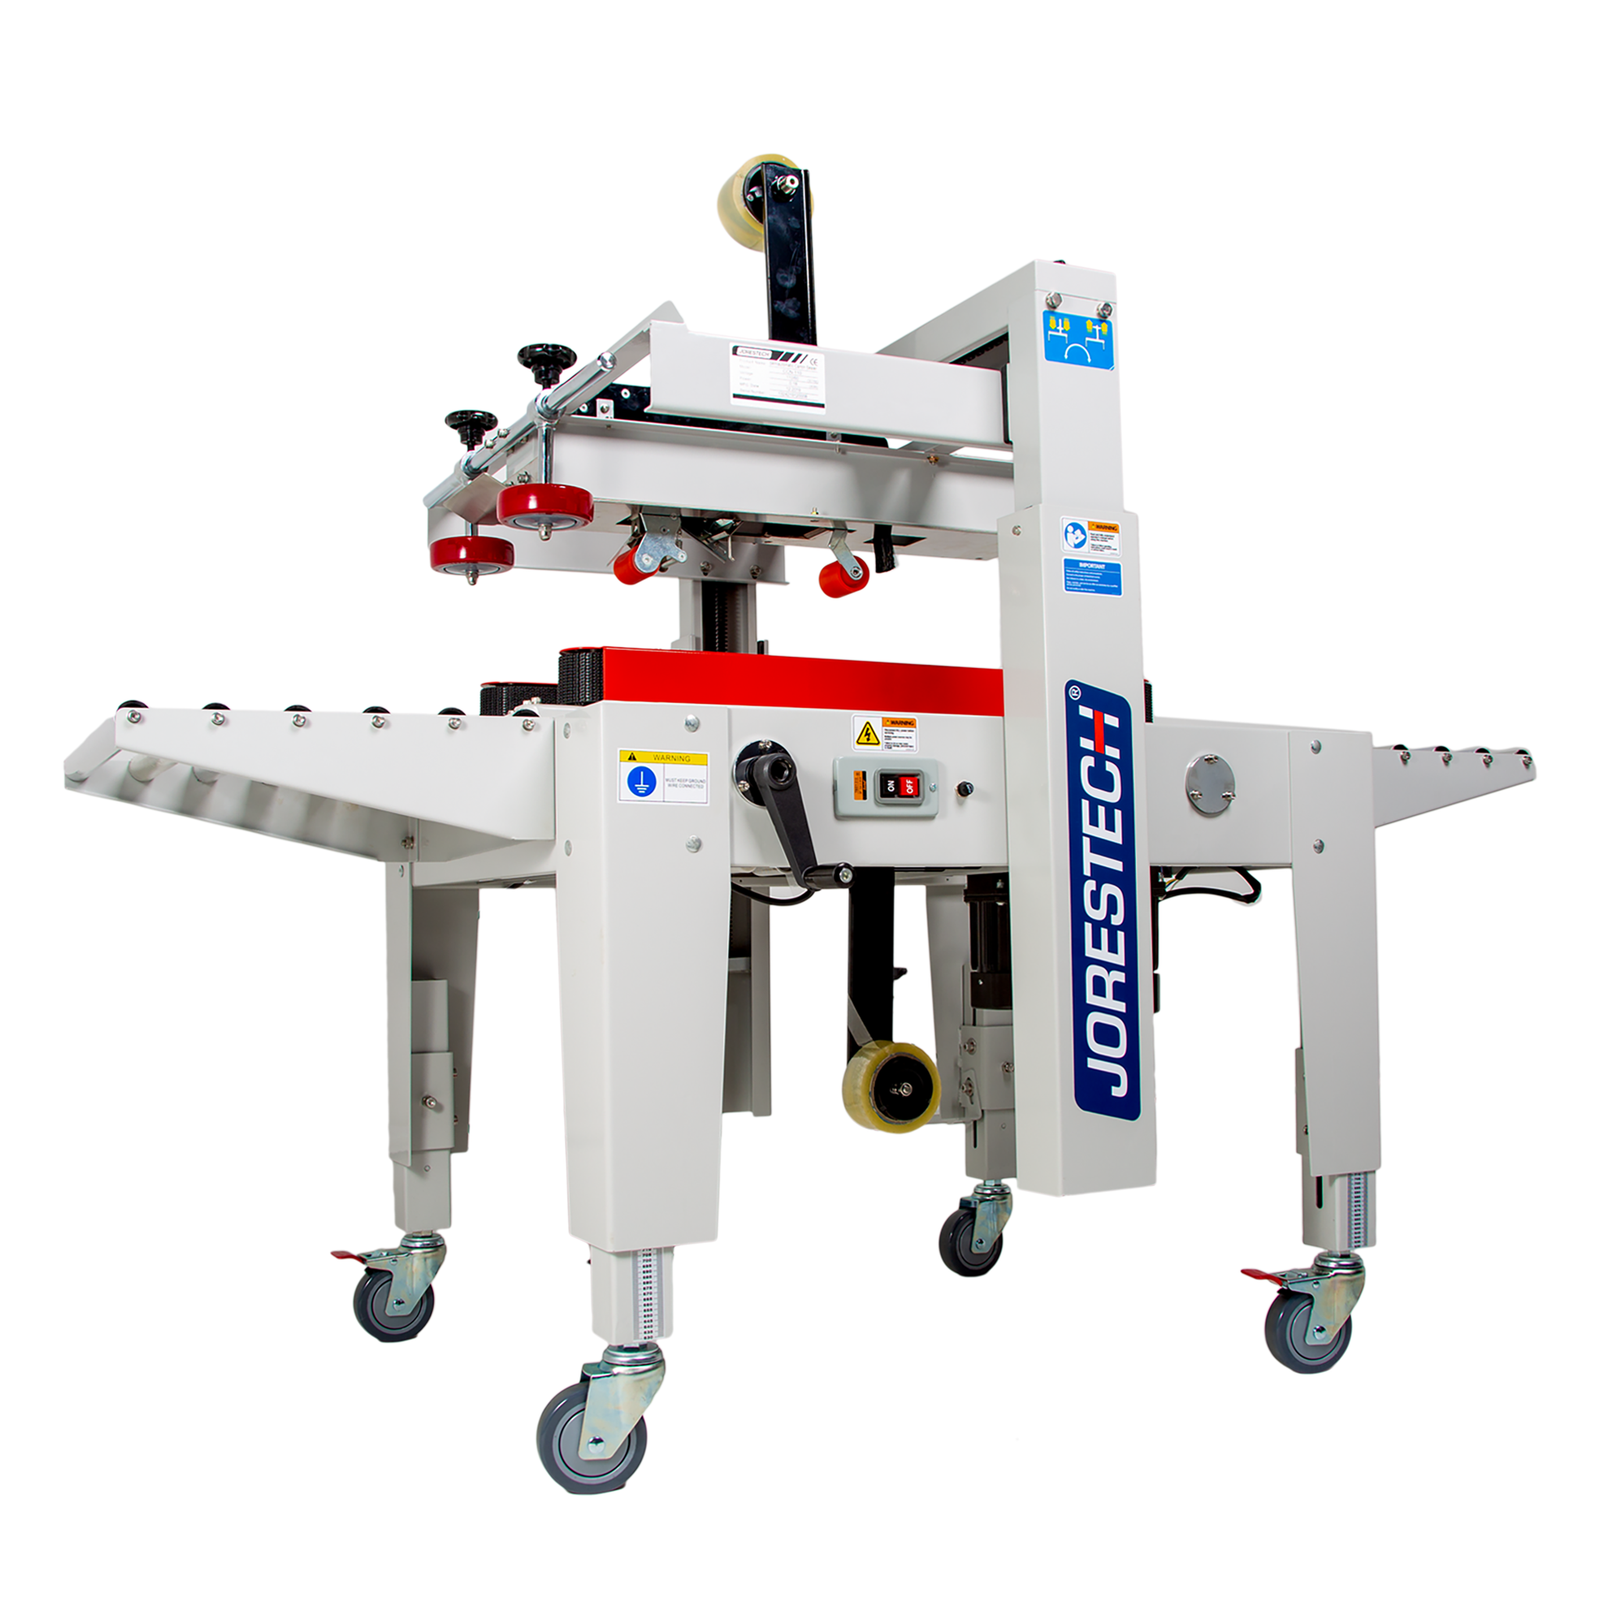 Front view of the semi-automatic case sealer machine for small and medium boxes with red side traction bars and JORESTECH logo